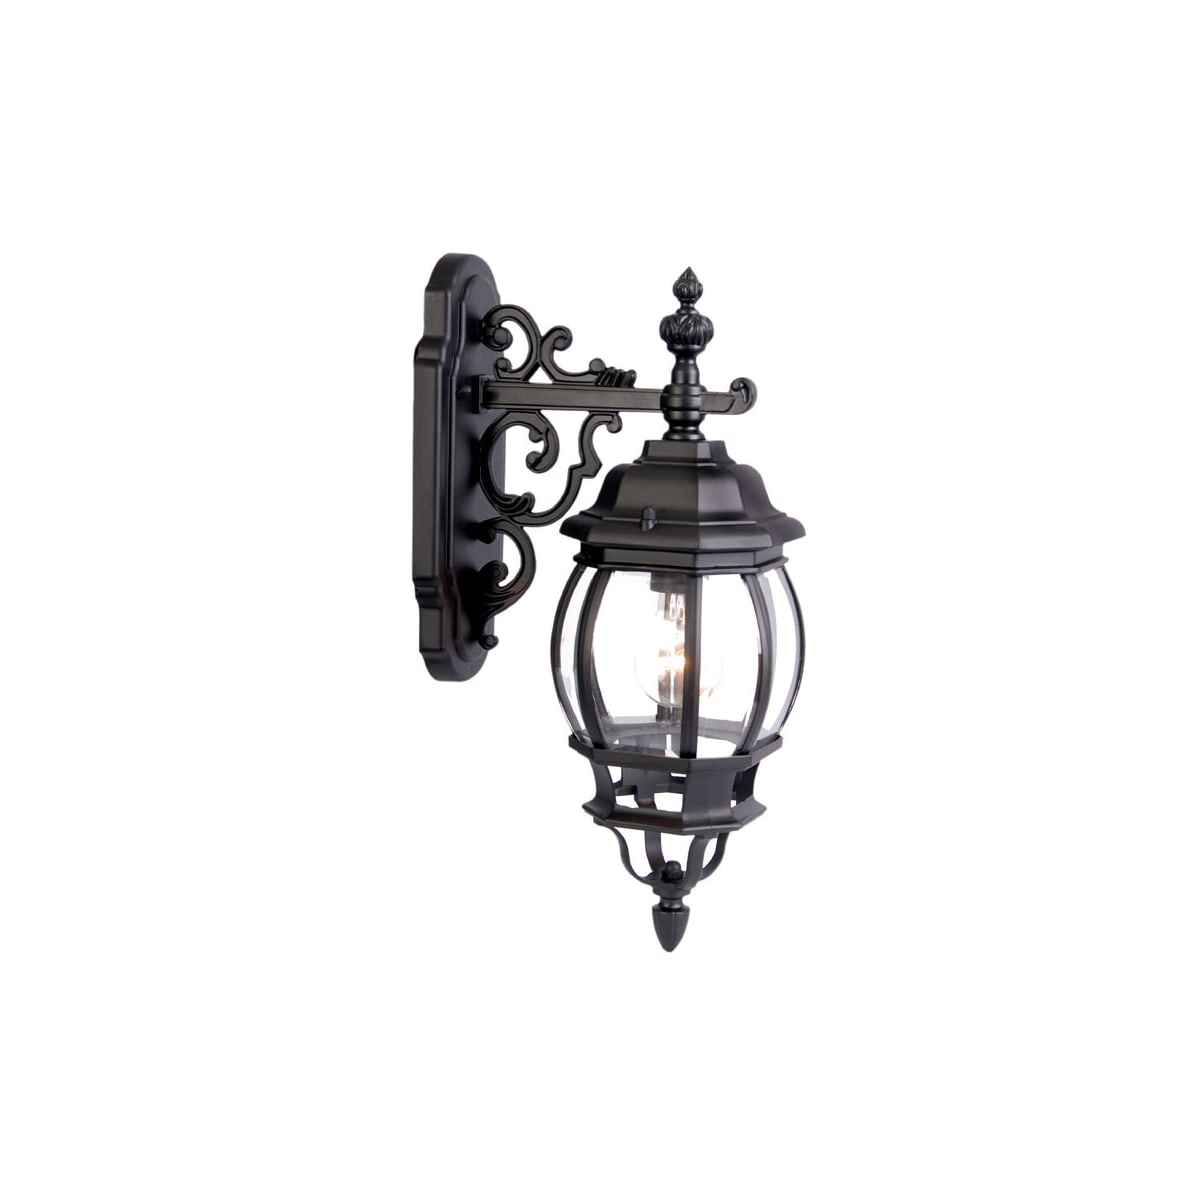 Acclaim Lighting 5155bk Cau 1 Light, 1 Light Black 18 75 In Outdoor Wall Lantern Sconce With Seeded Glass